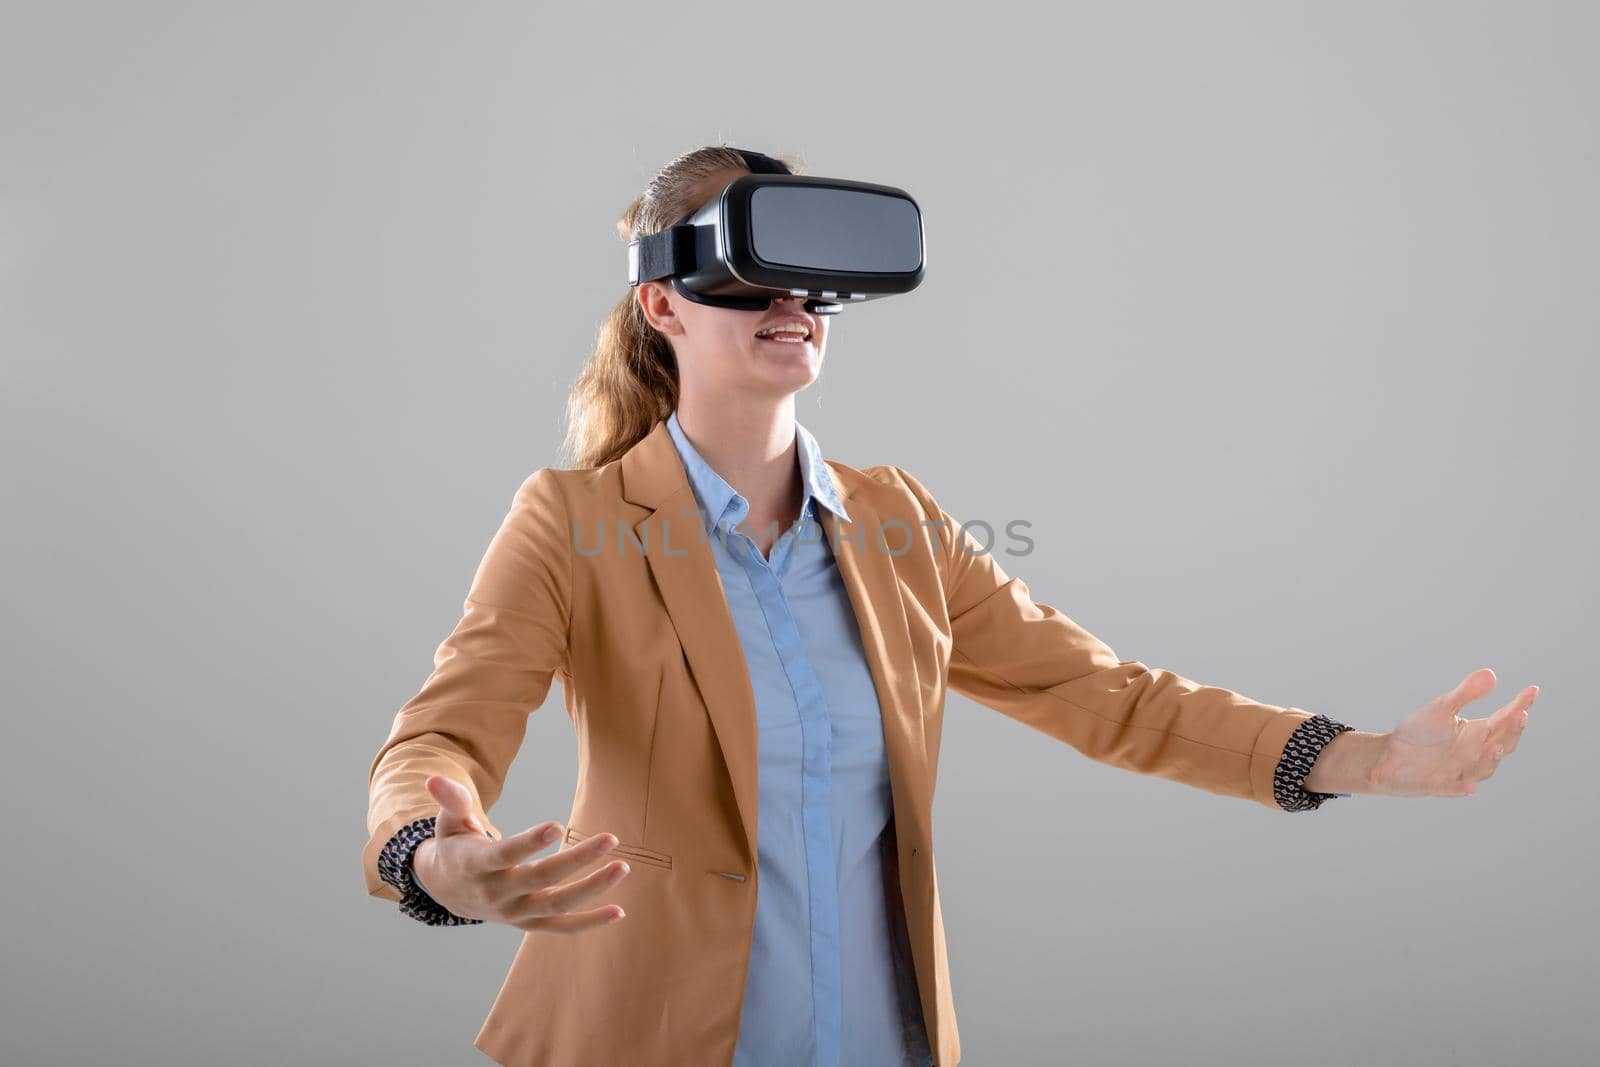 Caucasian businesswoman wearing vr headset widening her arms, isolated on grey background by Wavebreakmedia